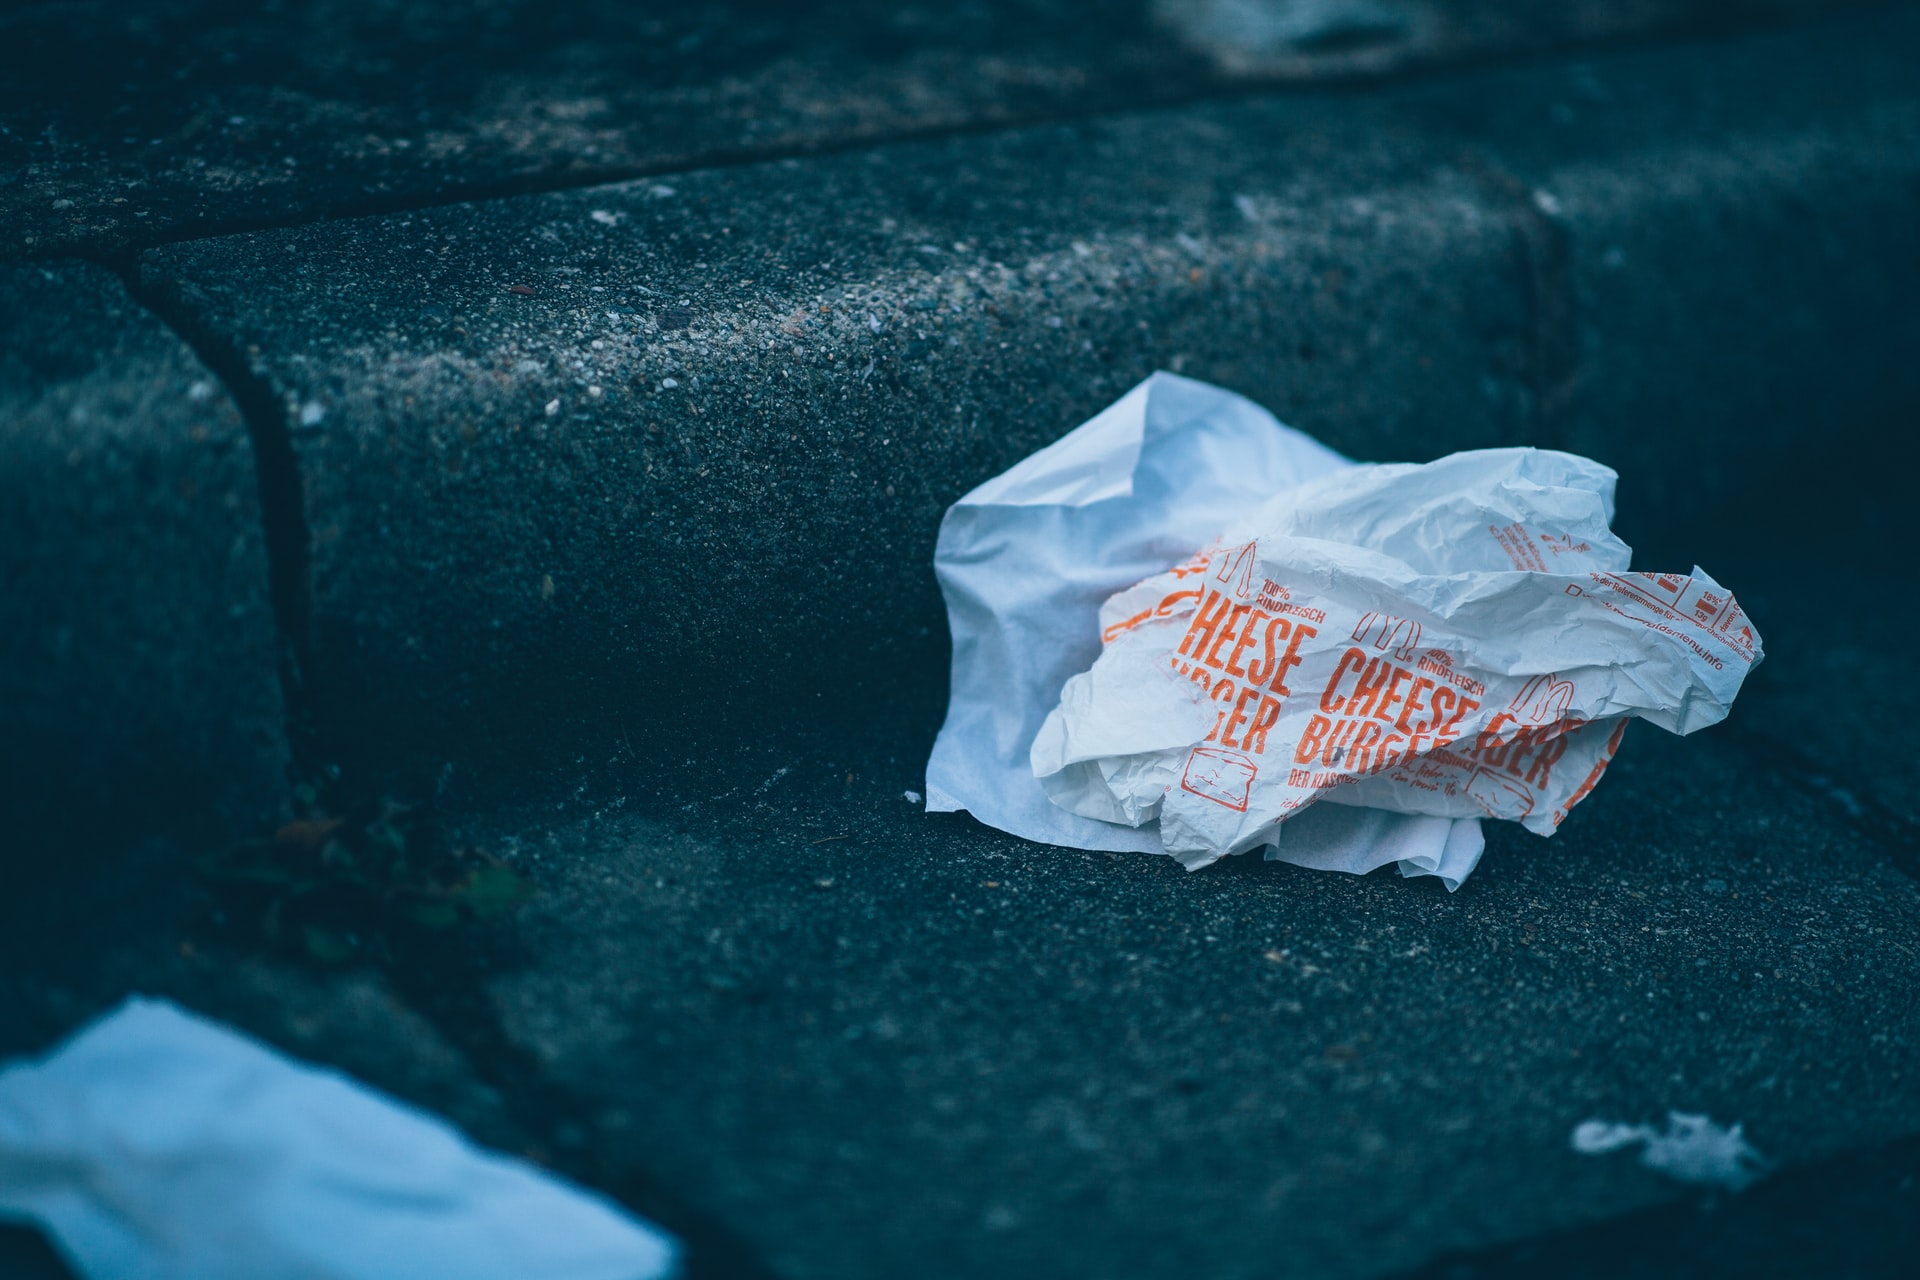 Discarded fast food wrapper